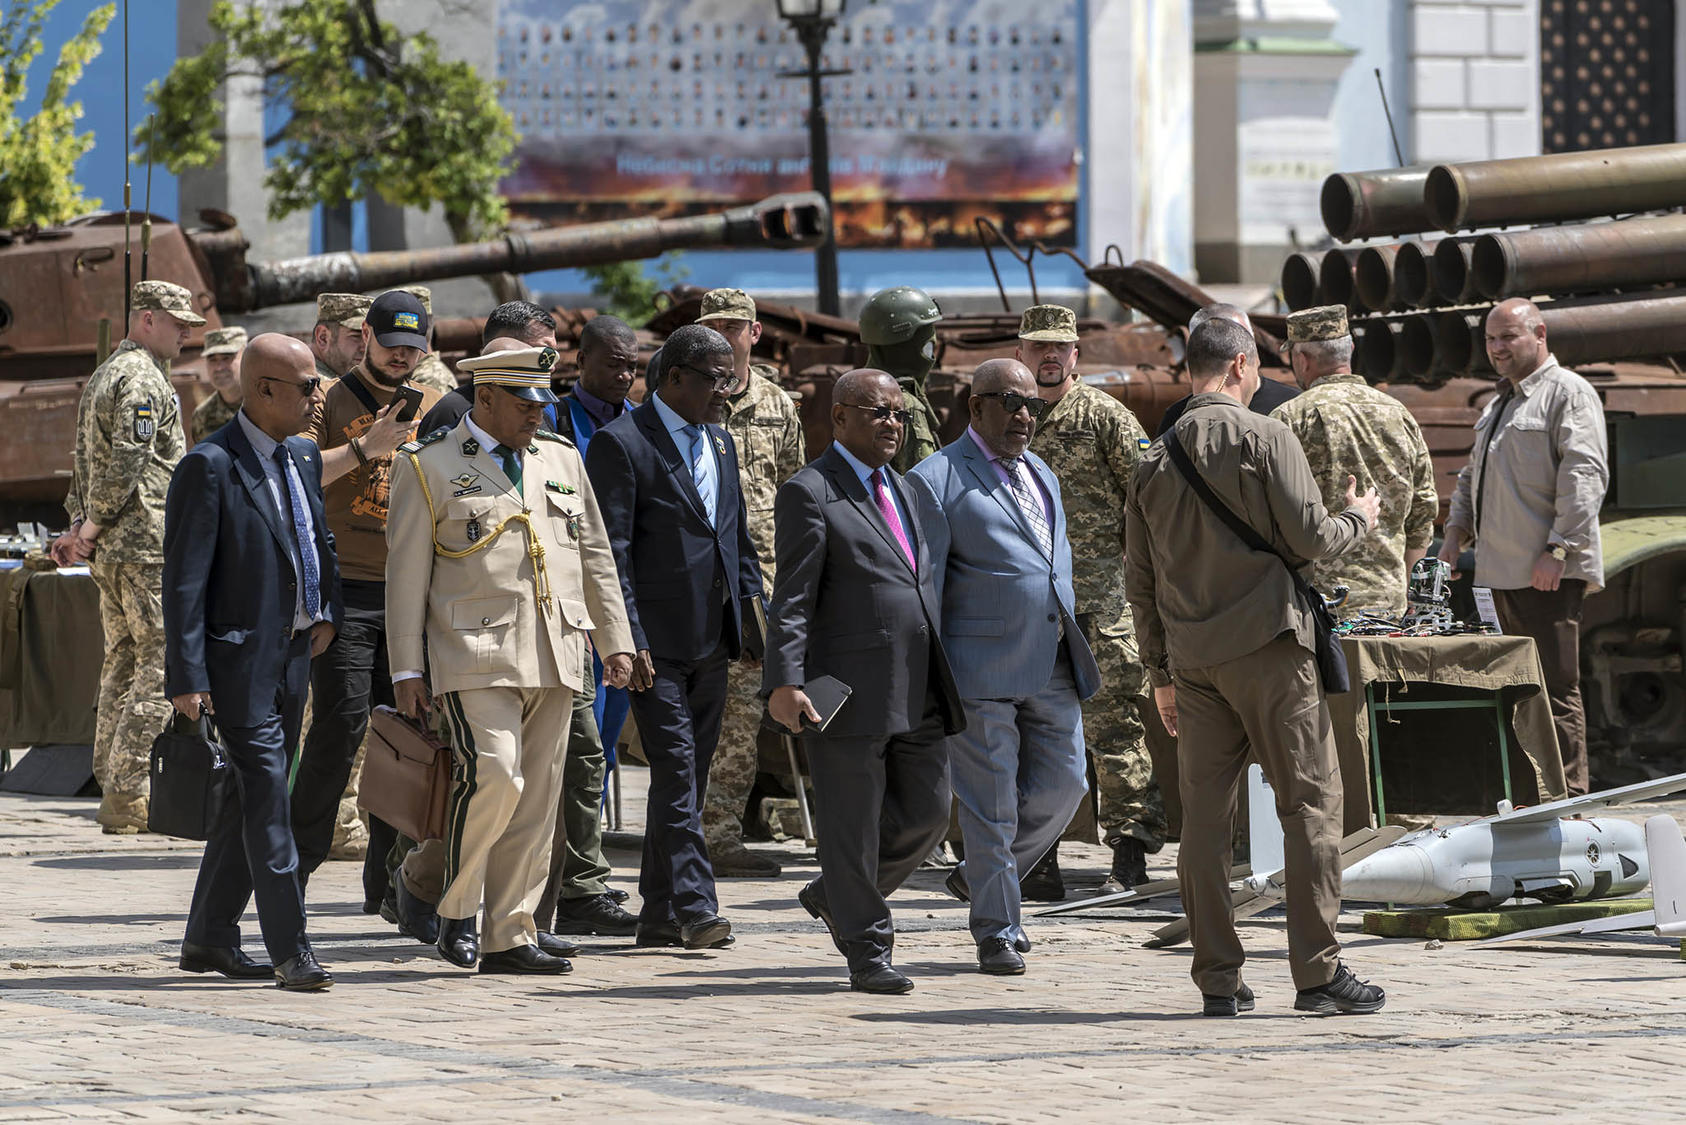 Ukrainians show African leaders captured Russian arms in June amid talks in Kyiv on seeking a peace process. Ukraine has escalated its diplomacy in the Global South, offering its peace plan based on international law. (Brendan Hoffman/The New York Times)